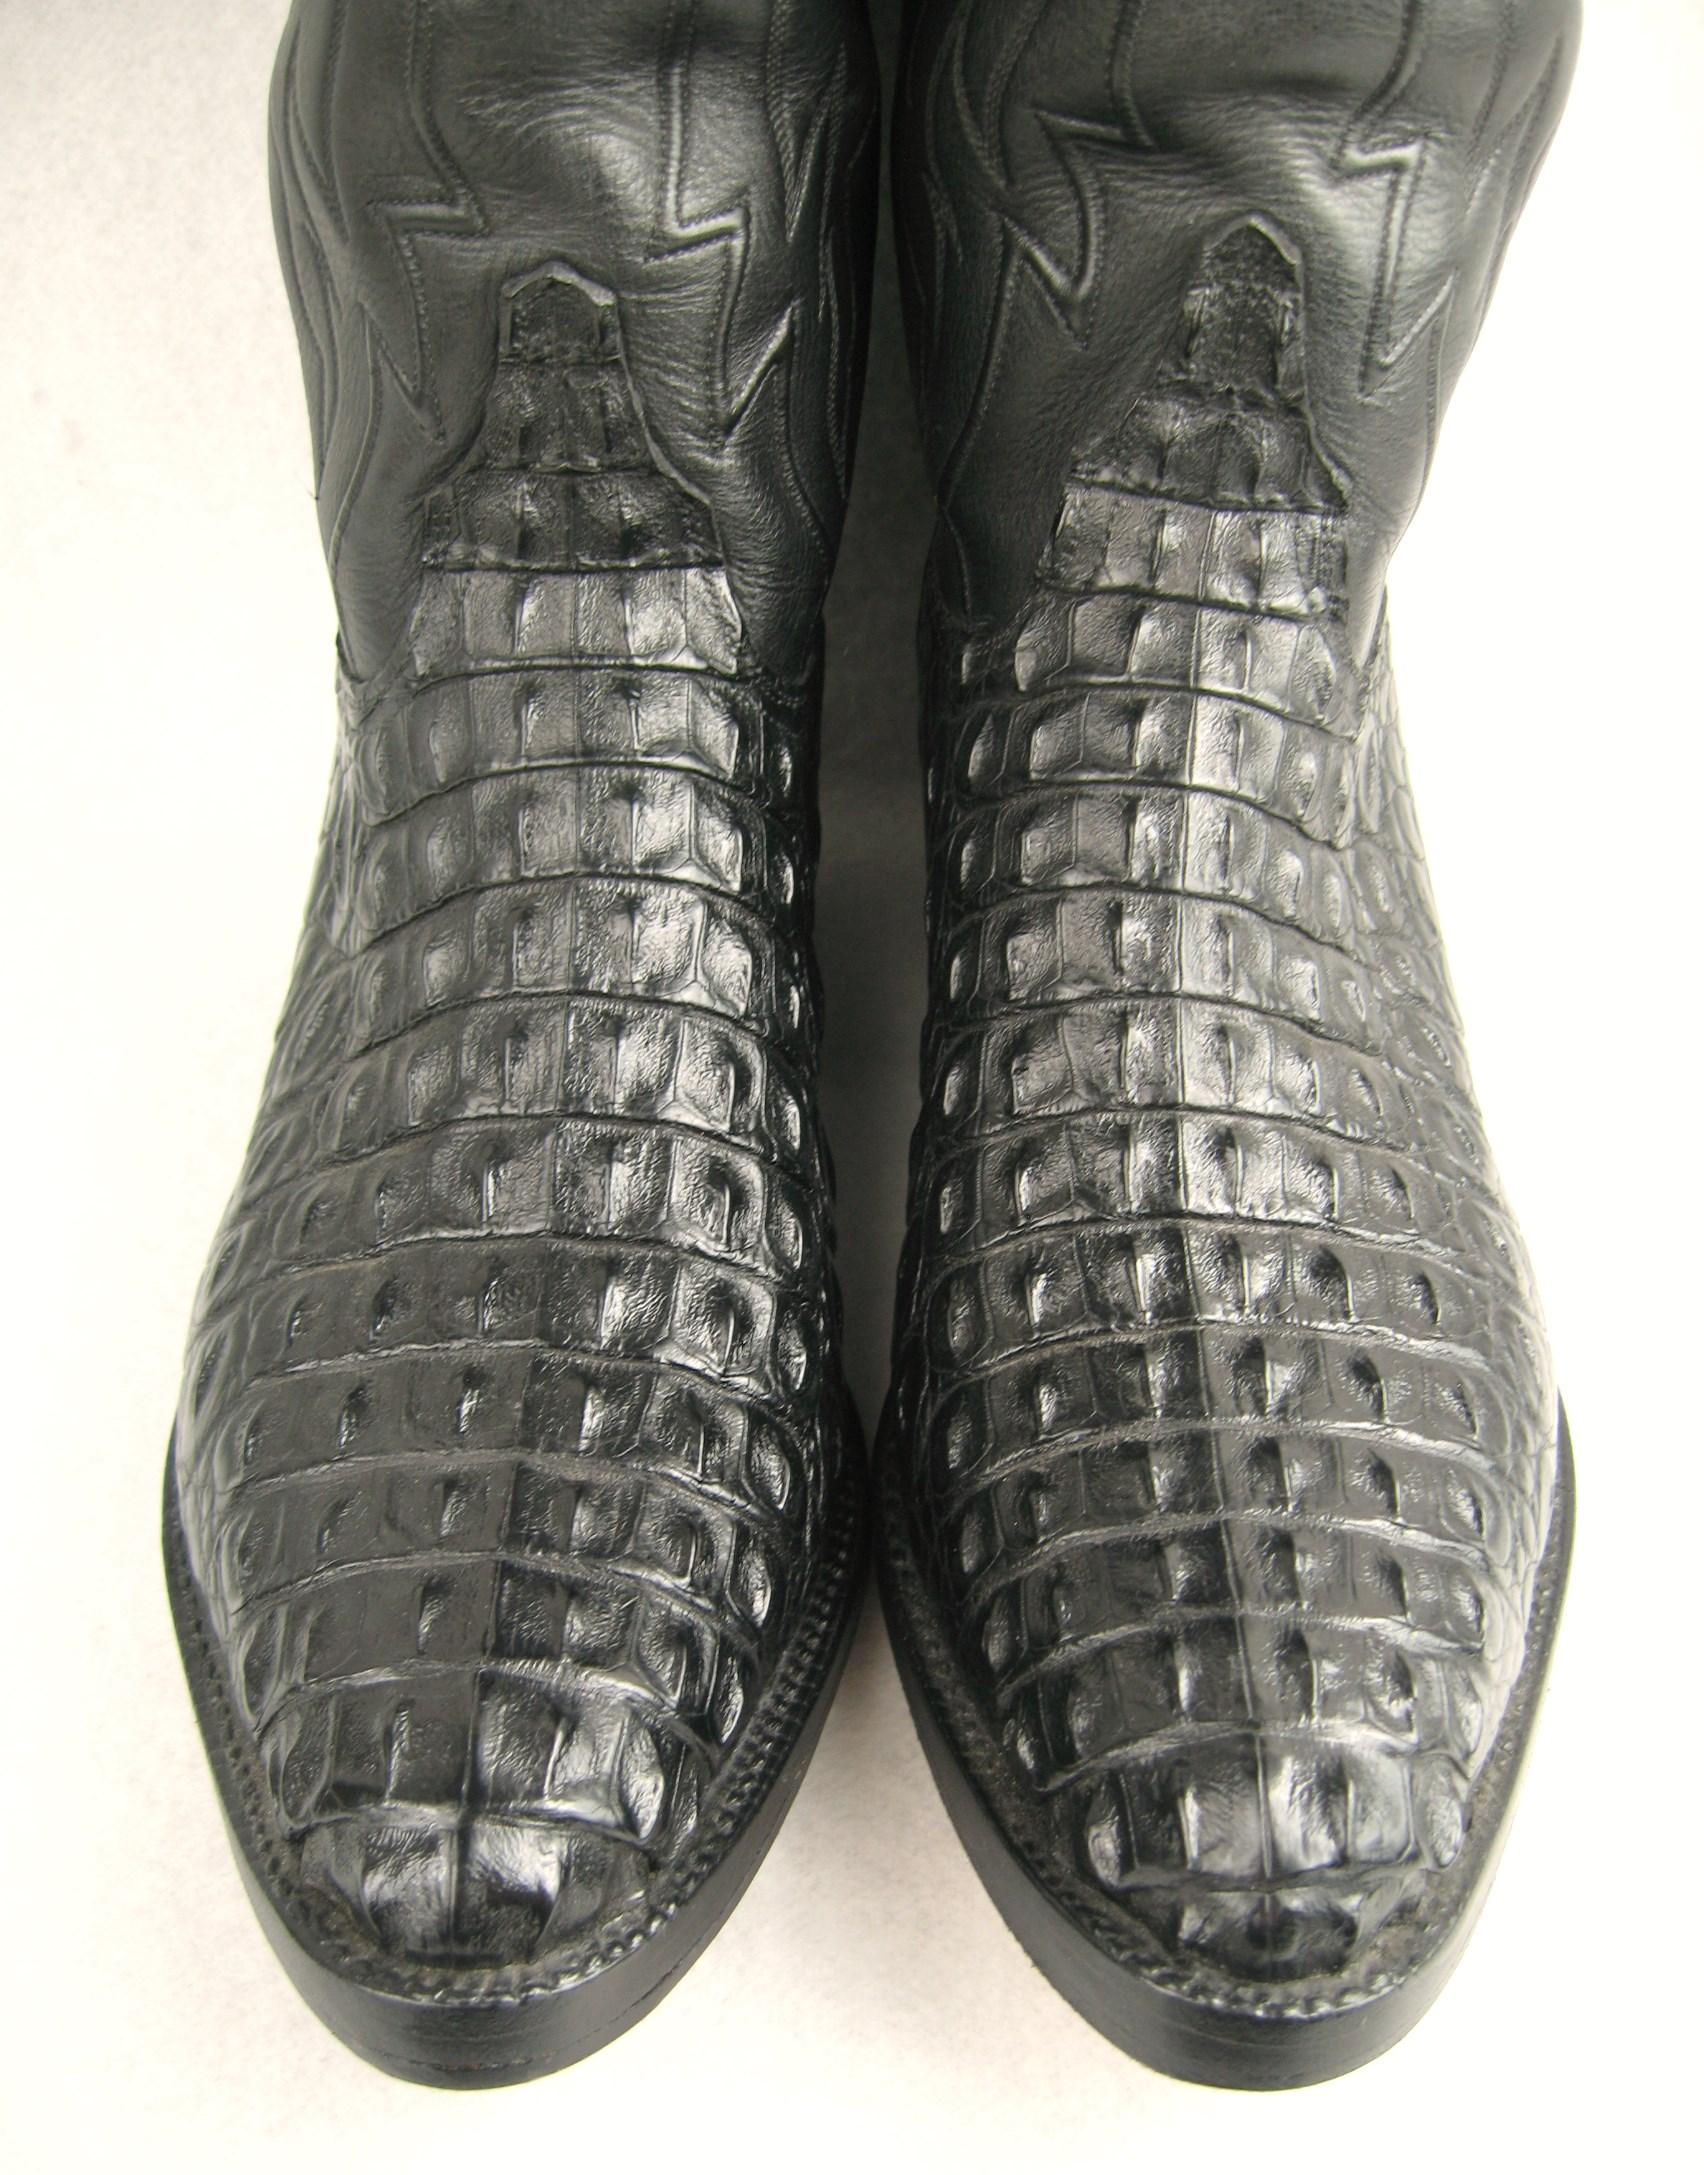  Lucchese Black Horned Back Alligator Cowboy Boots, Men’s Size 10 D, in Excellent Pre-Owned Condition. Soft and supple handmade boots.   Please be sure to check our storefront for more fashion as we have both Vintage and Contemporary fashions. ready